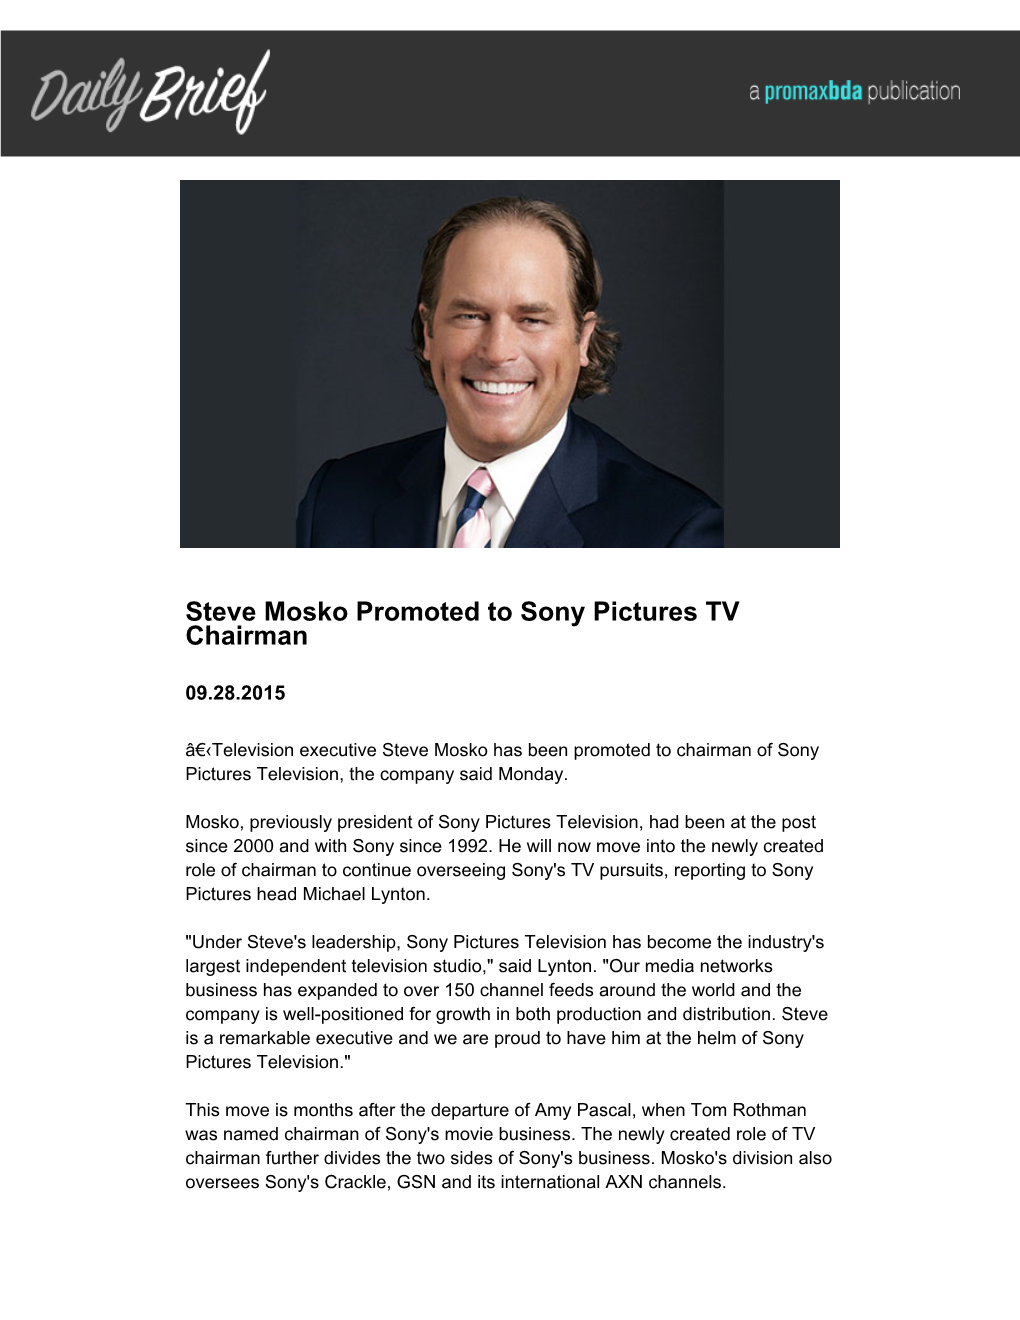 Steve Mosko Promoted to Sony Pictures TV Chairman